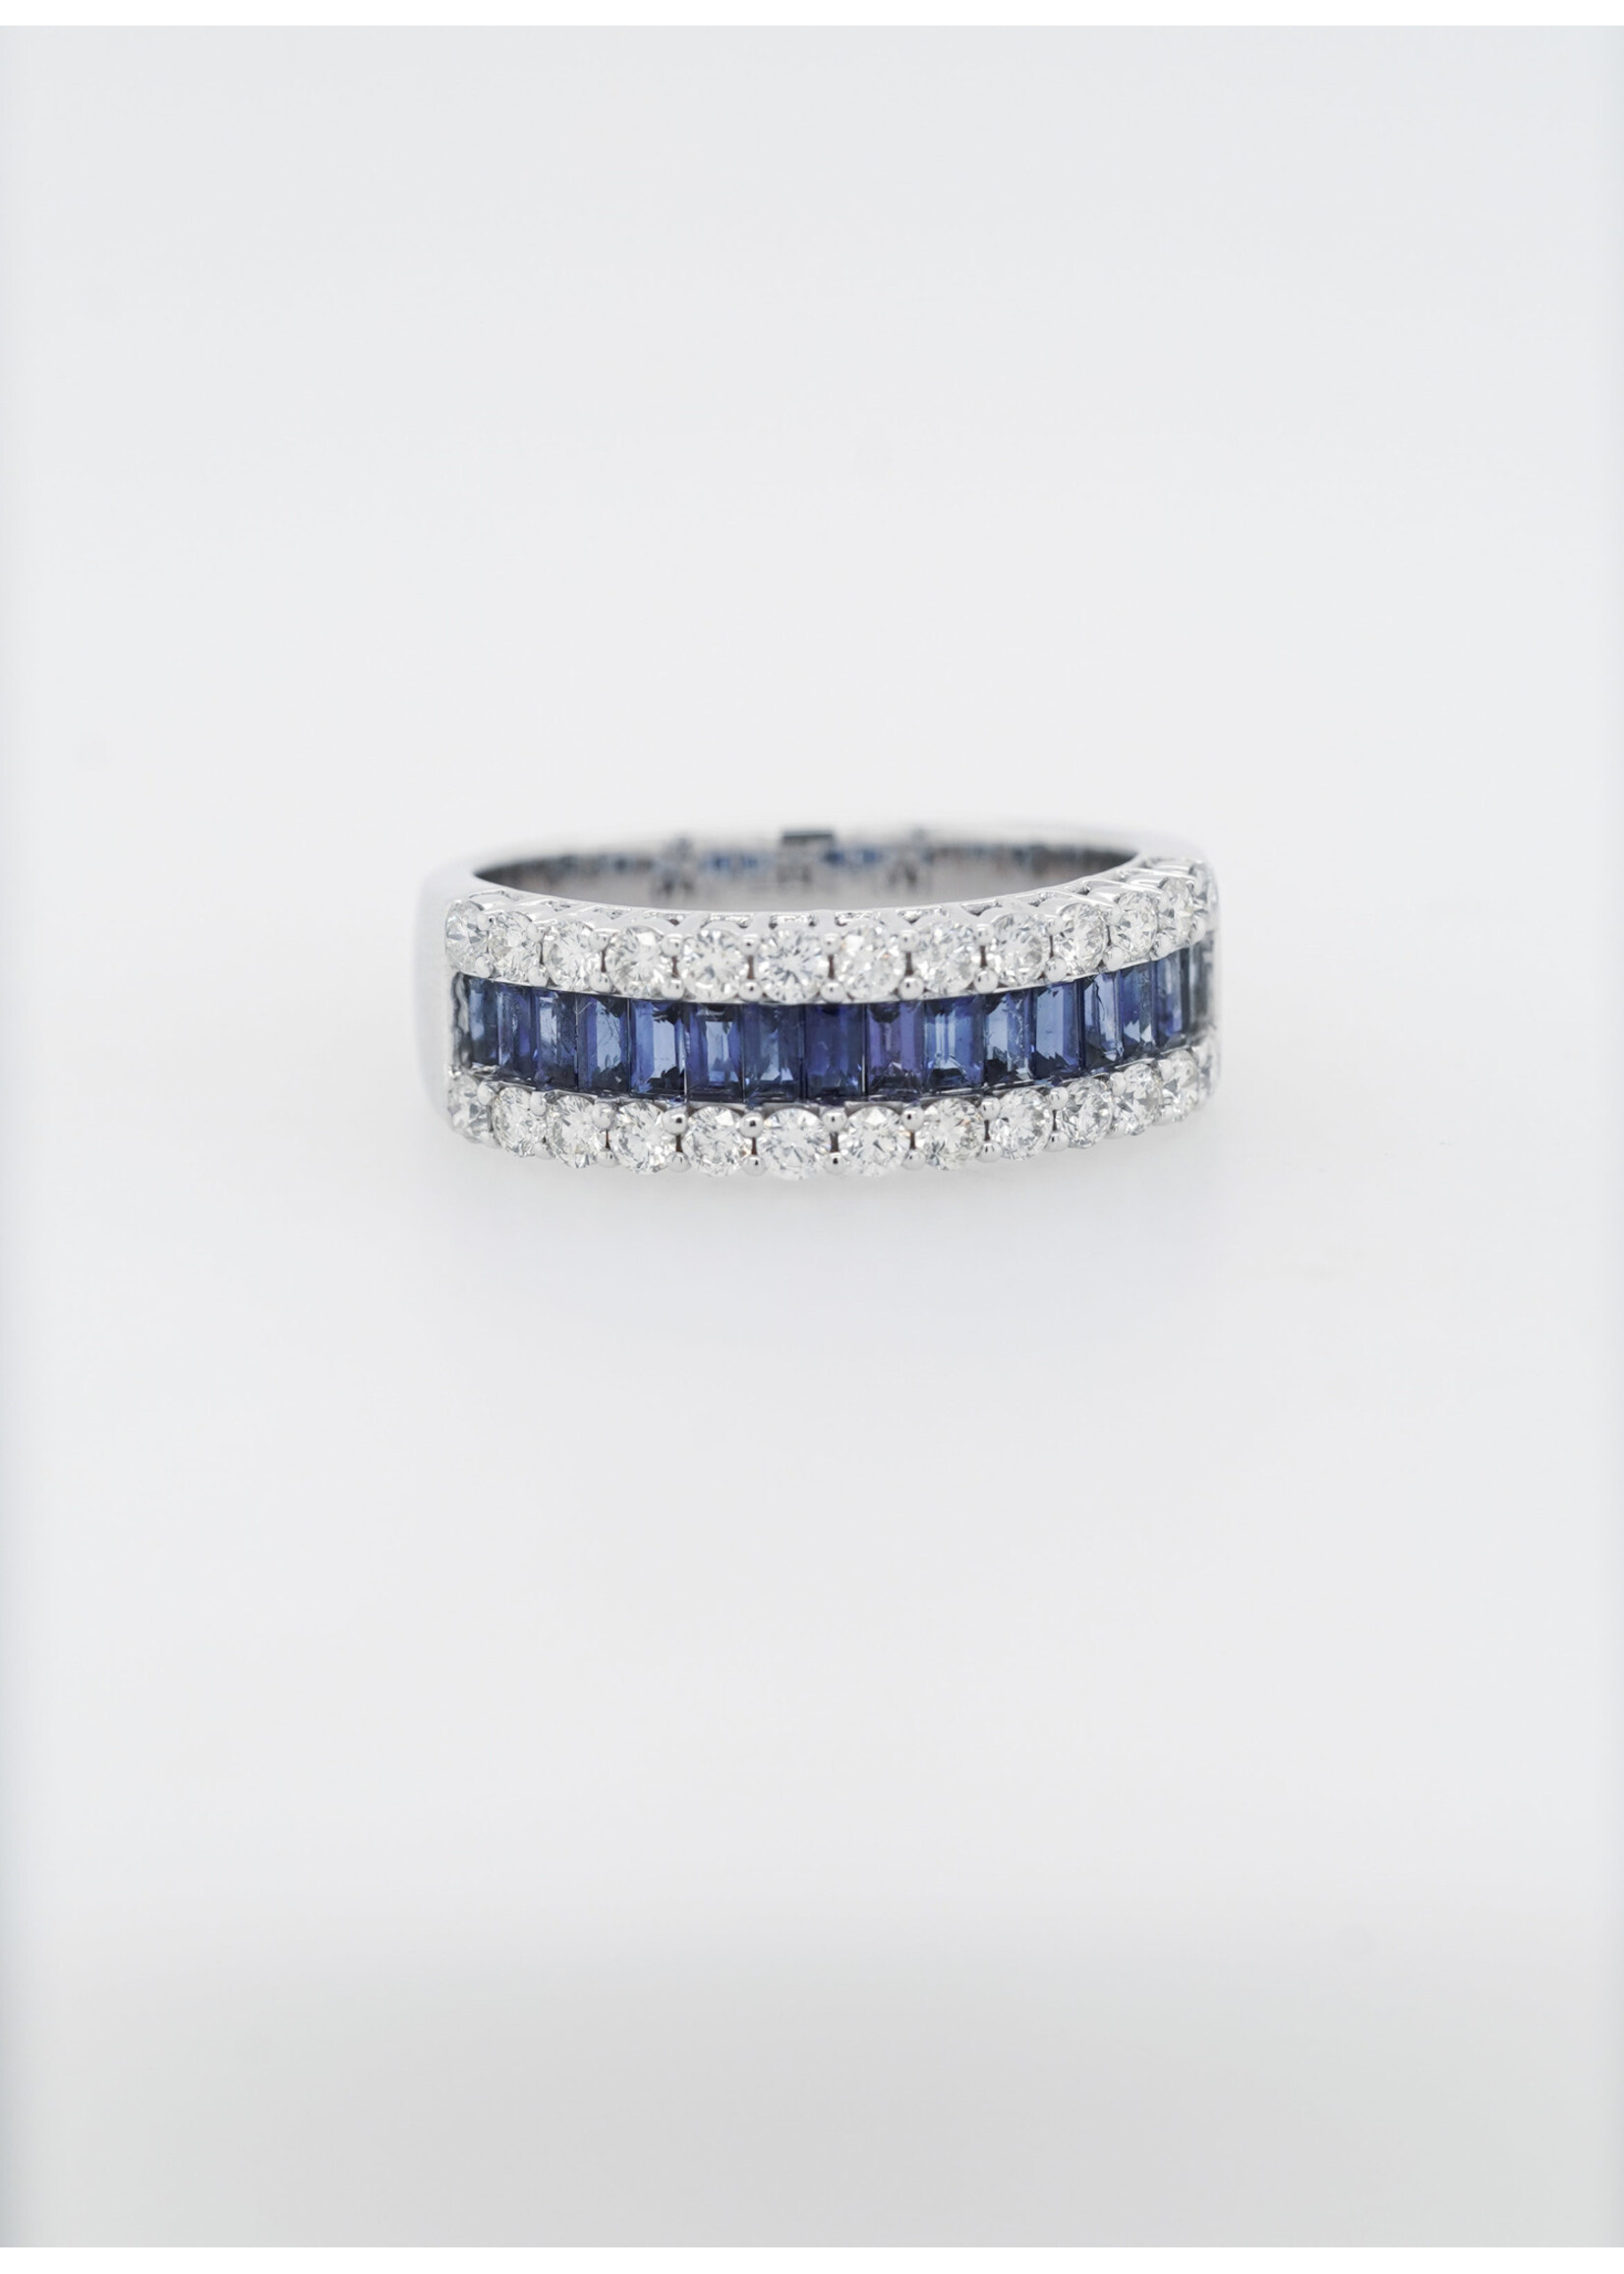 14KW 5.89g 1.86ctw Sapphire & Diamond Stackable Band (size 7.5)